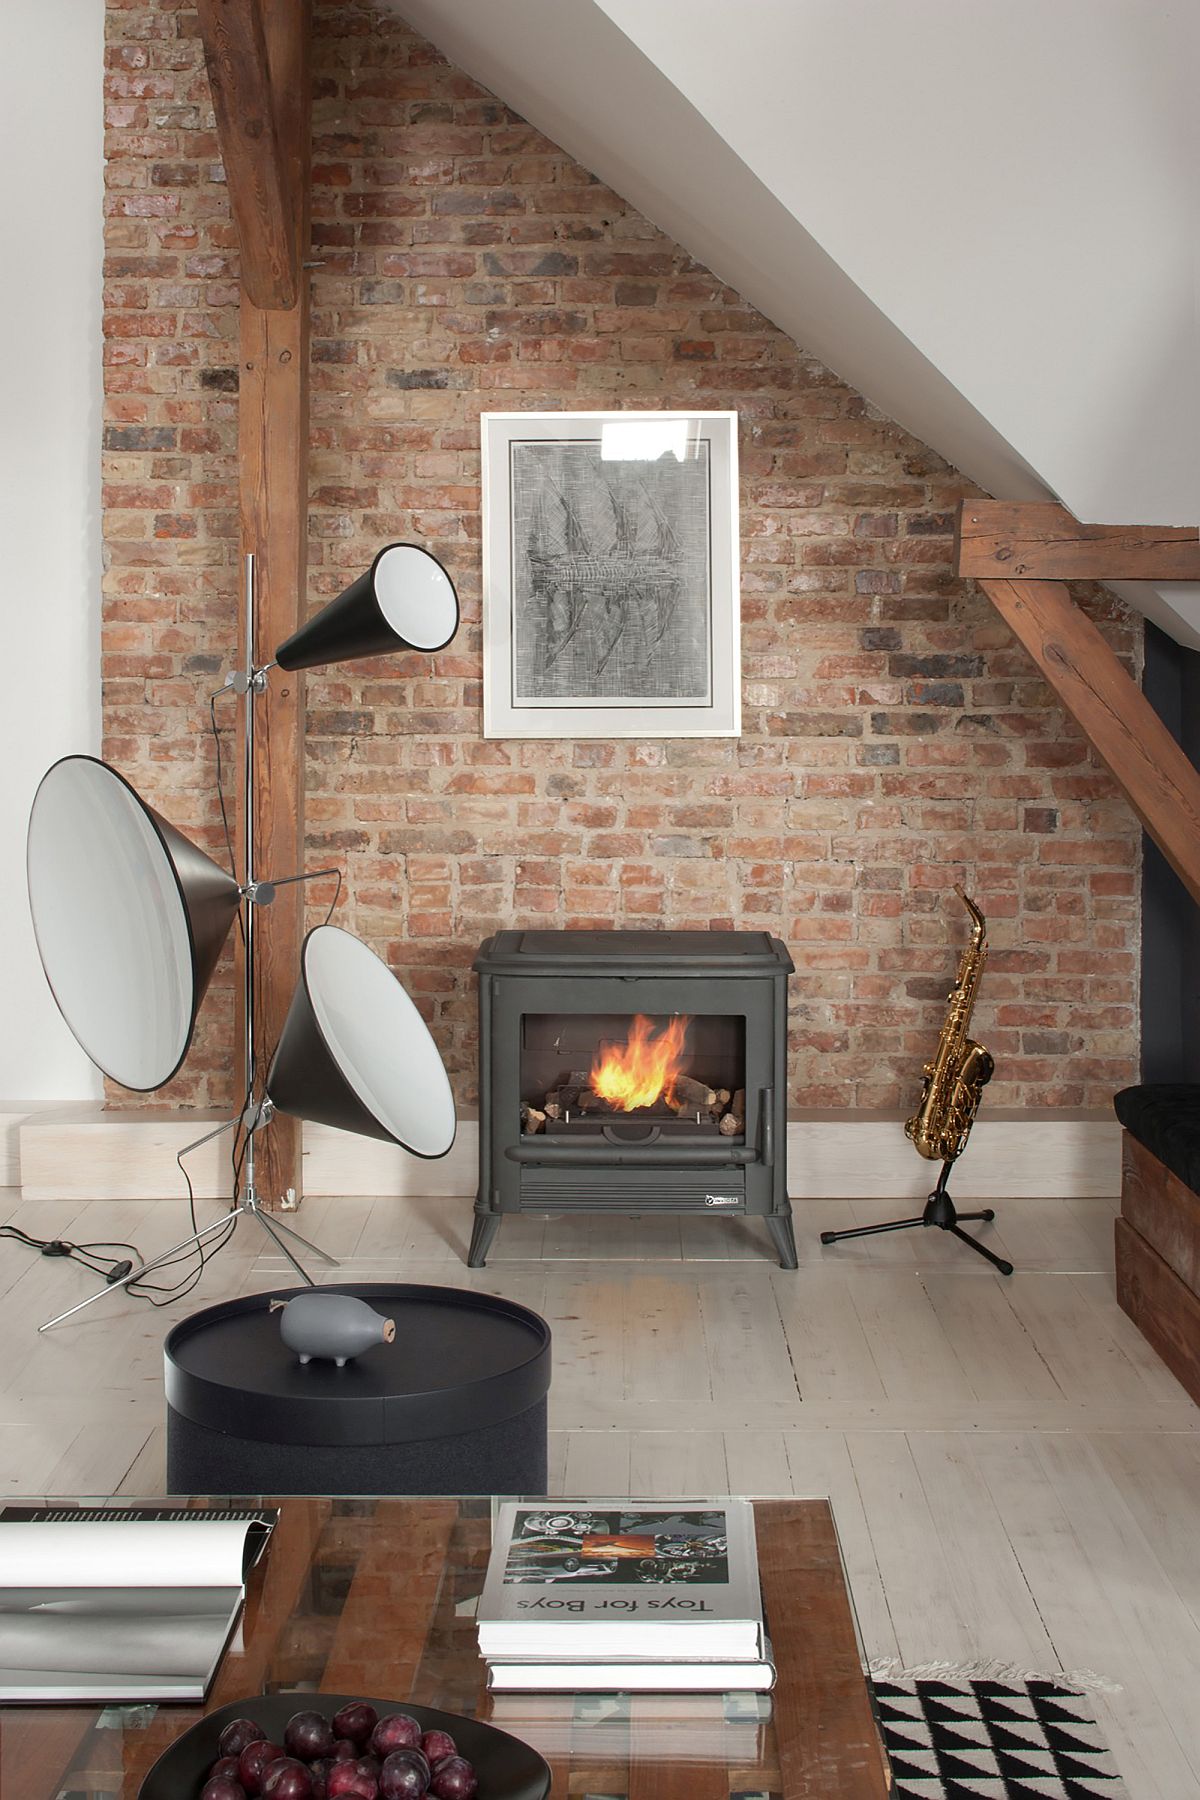 Small fireplace and roaring music system in the living room